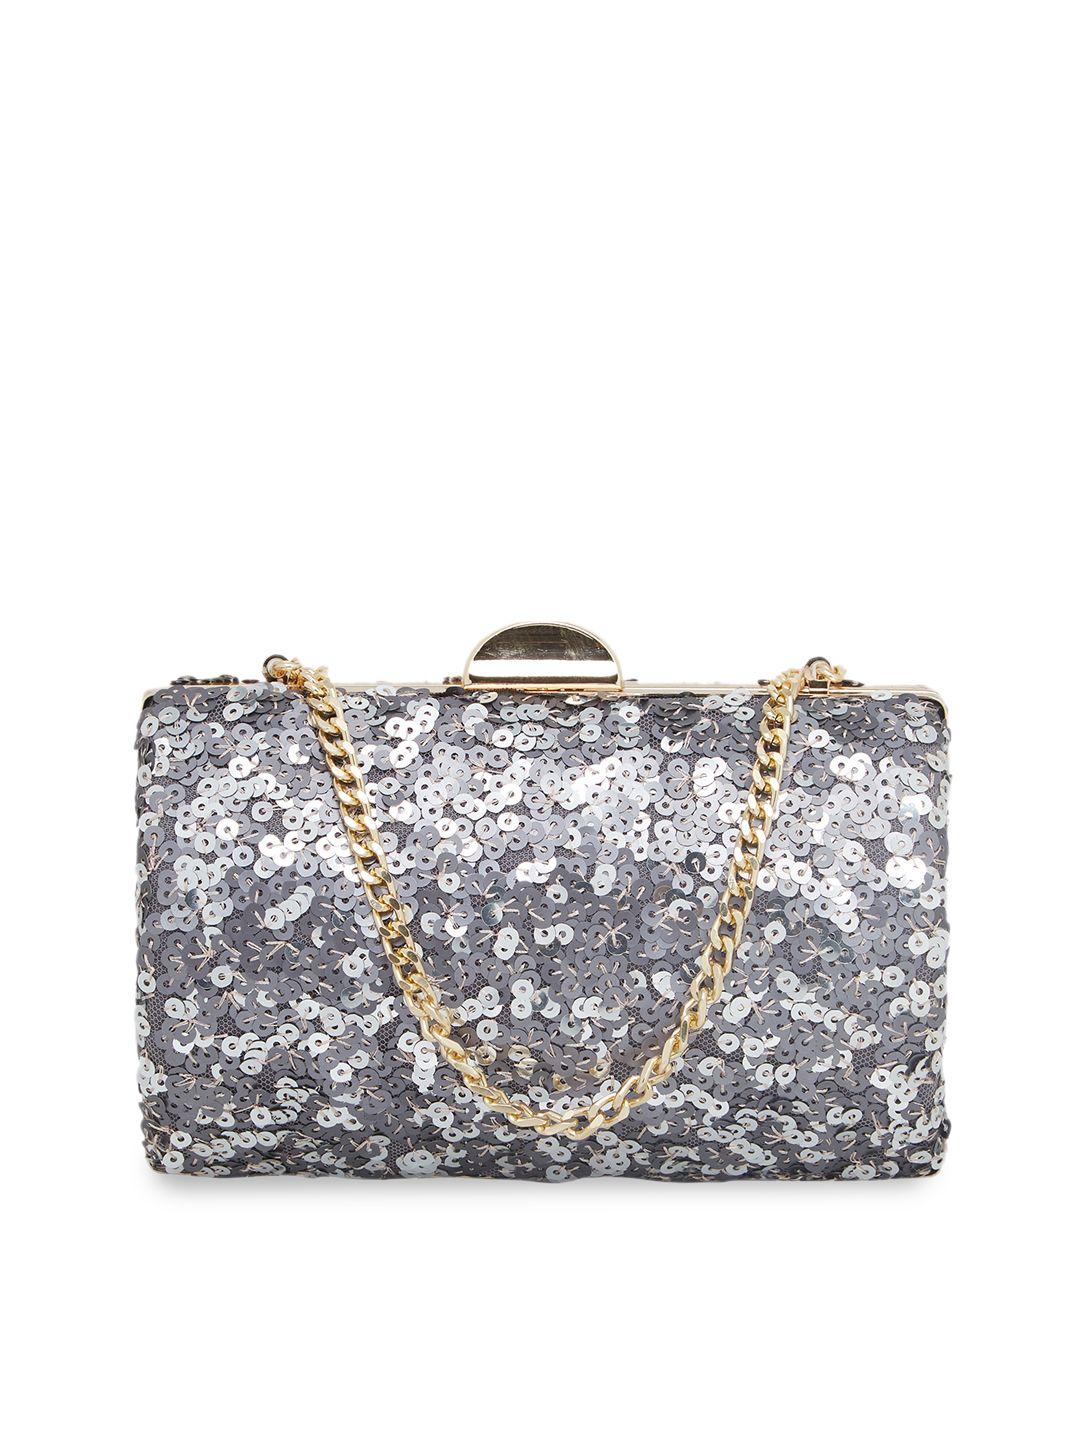 vdesi silver-toned embellished box clutch